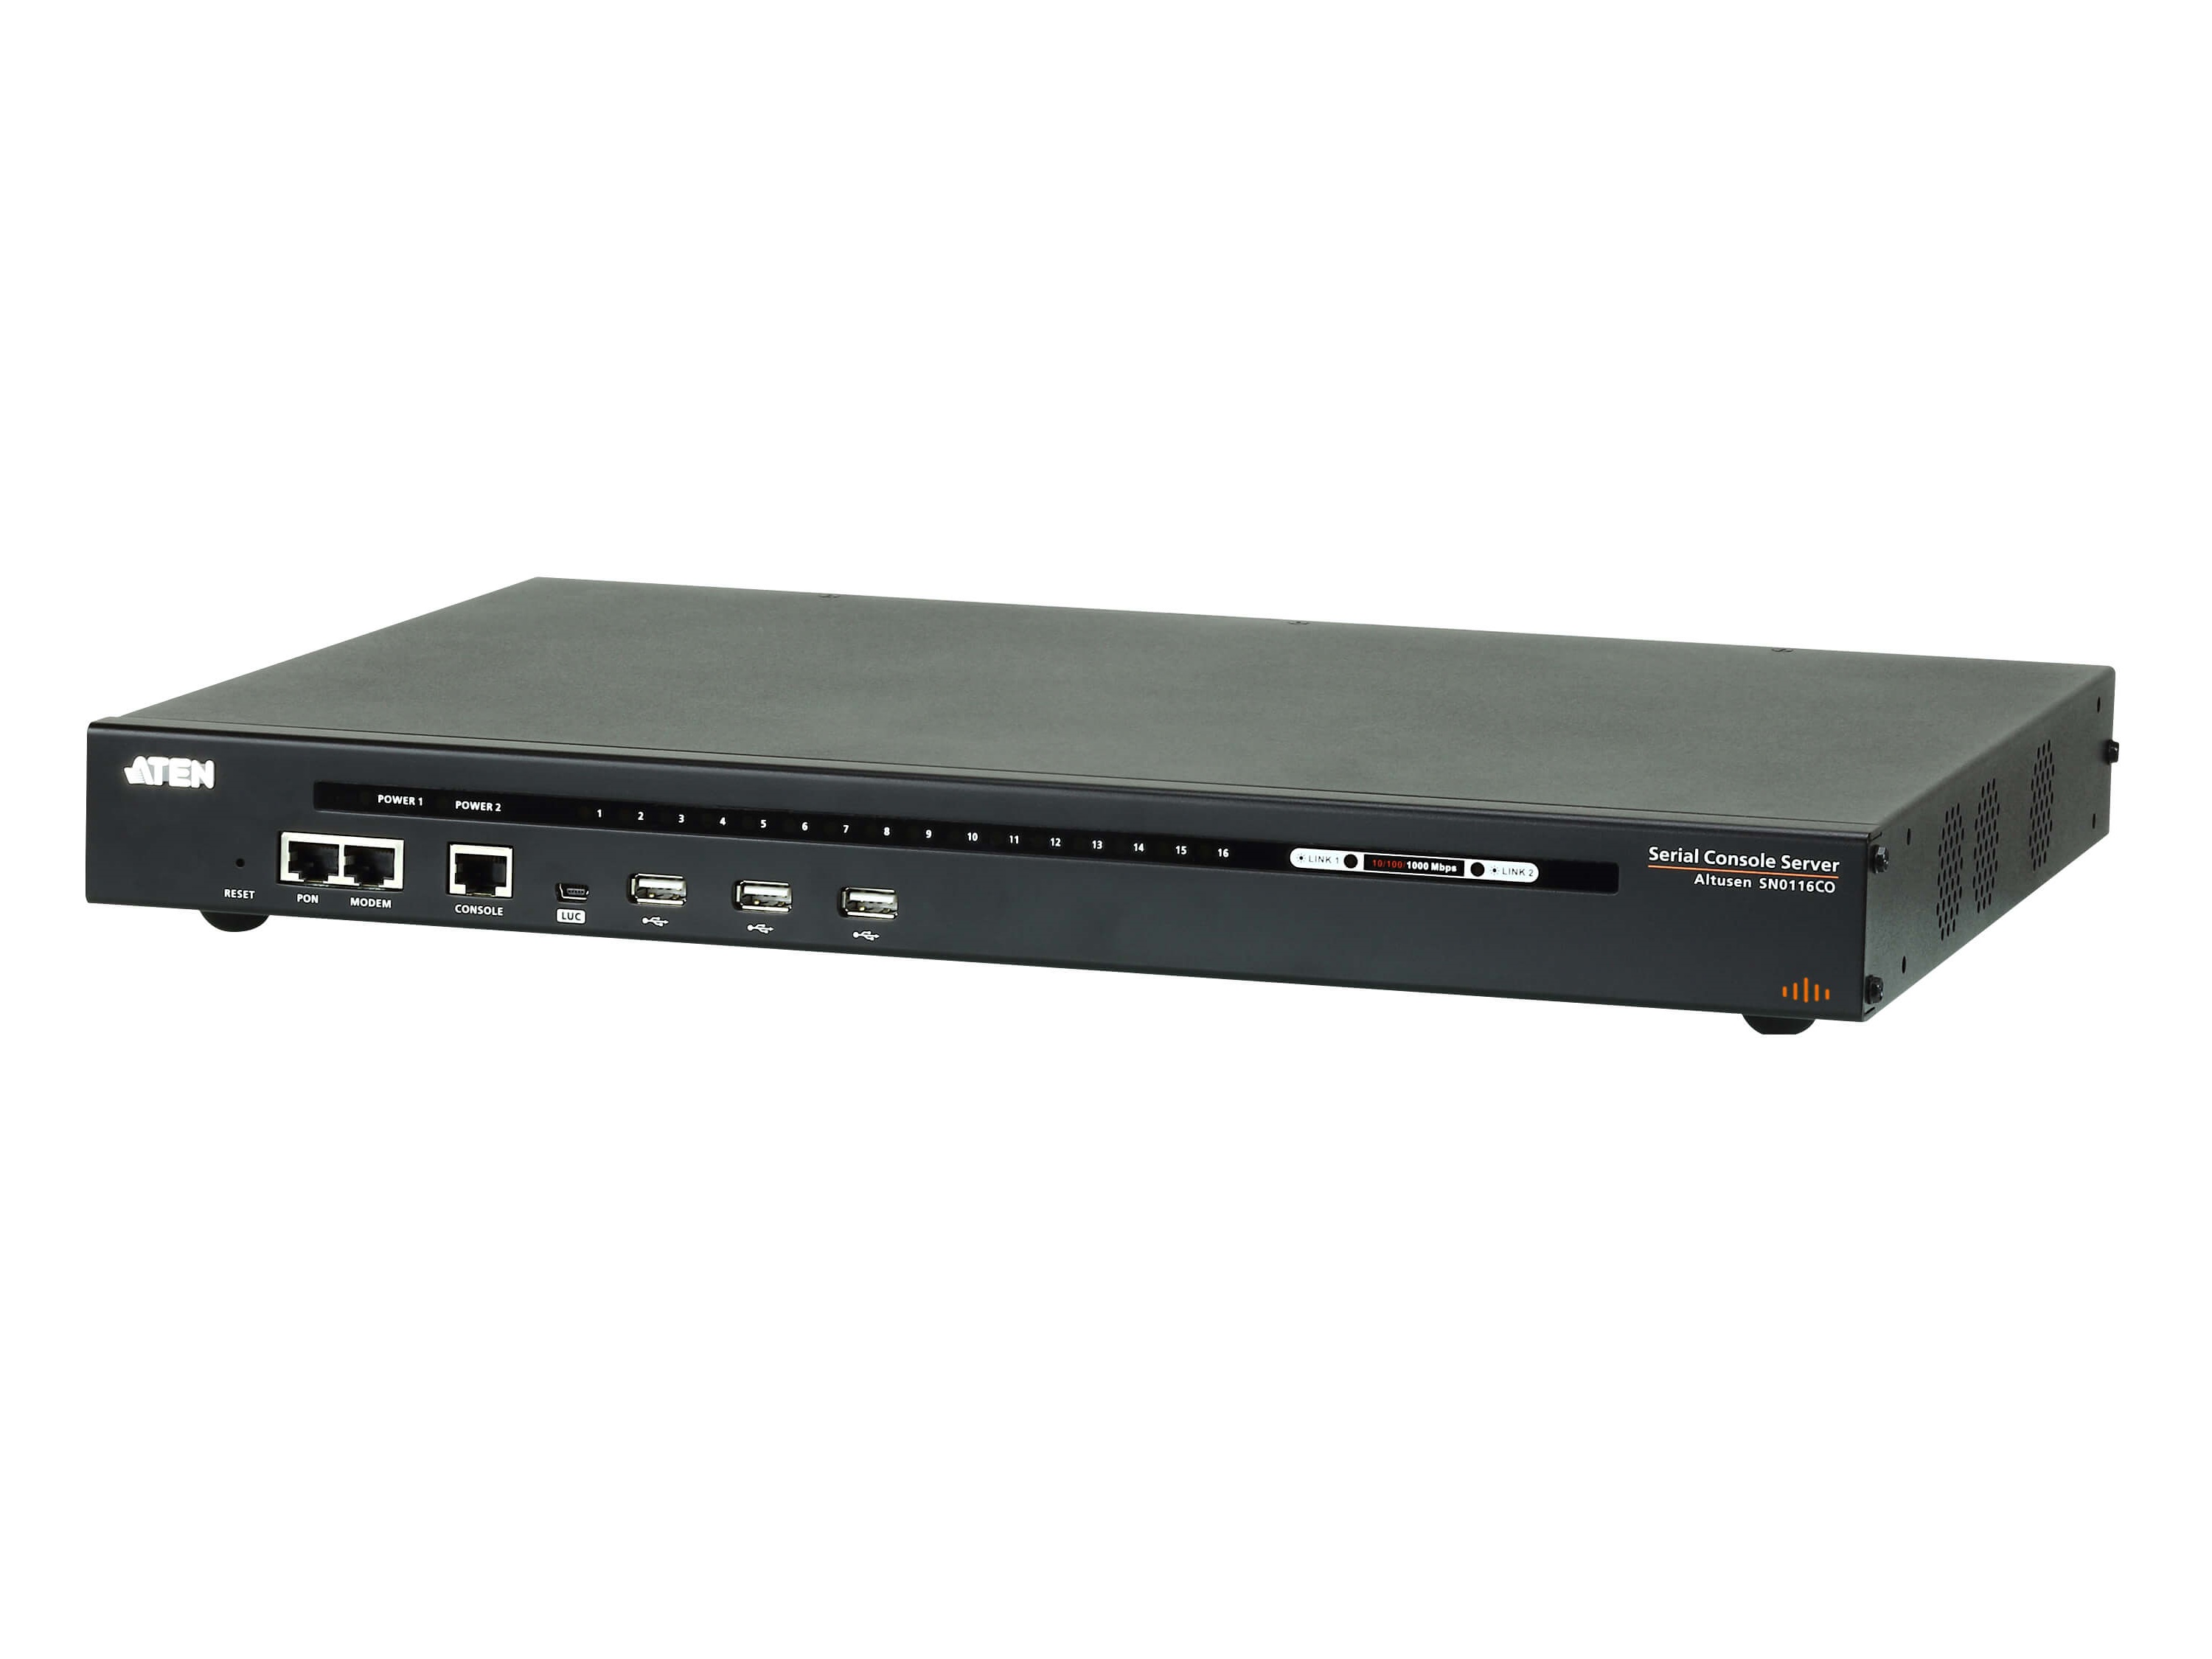 SN0116COD 16-Port Serial Console Server with Dual Power/LAN/DC Power by Aten